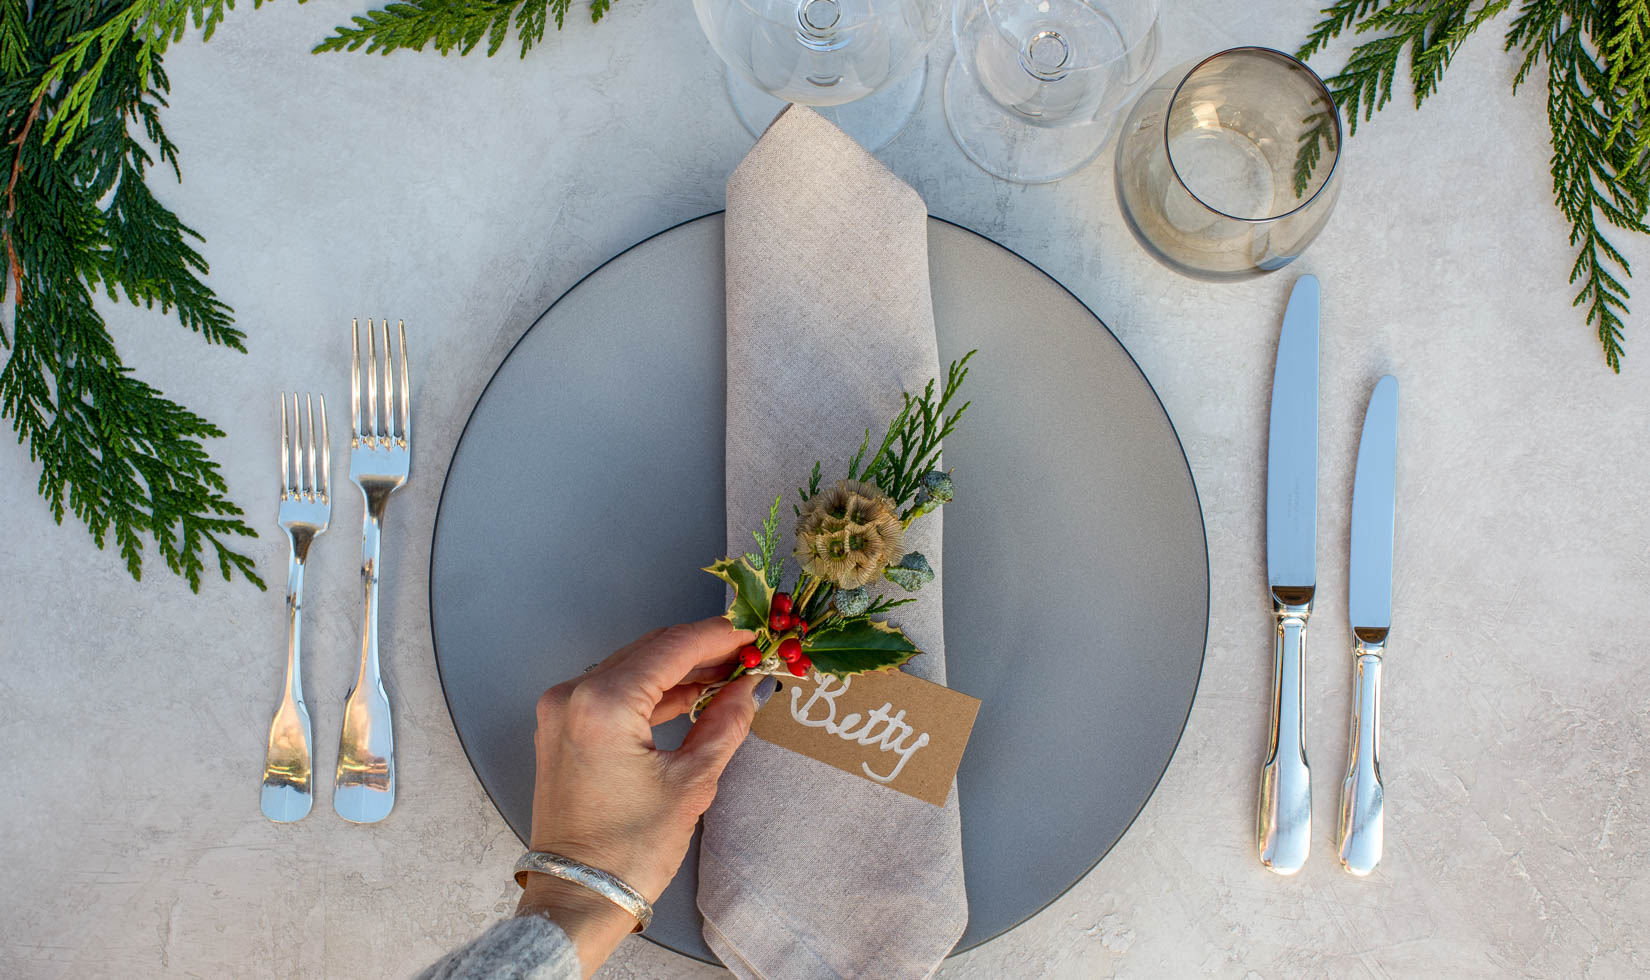 scabiosa pods and holly place setting for christmas table